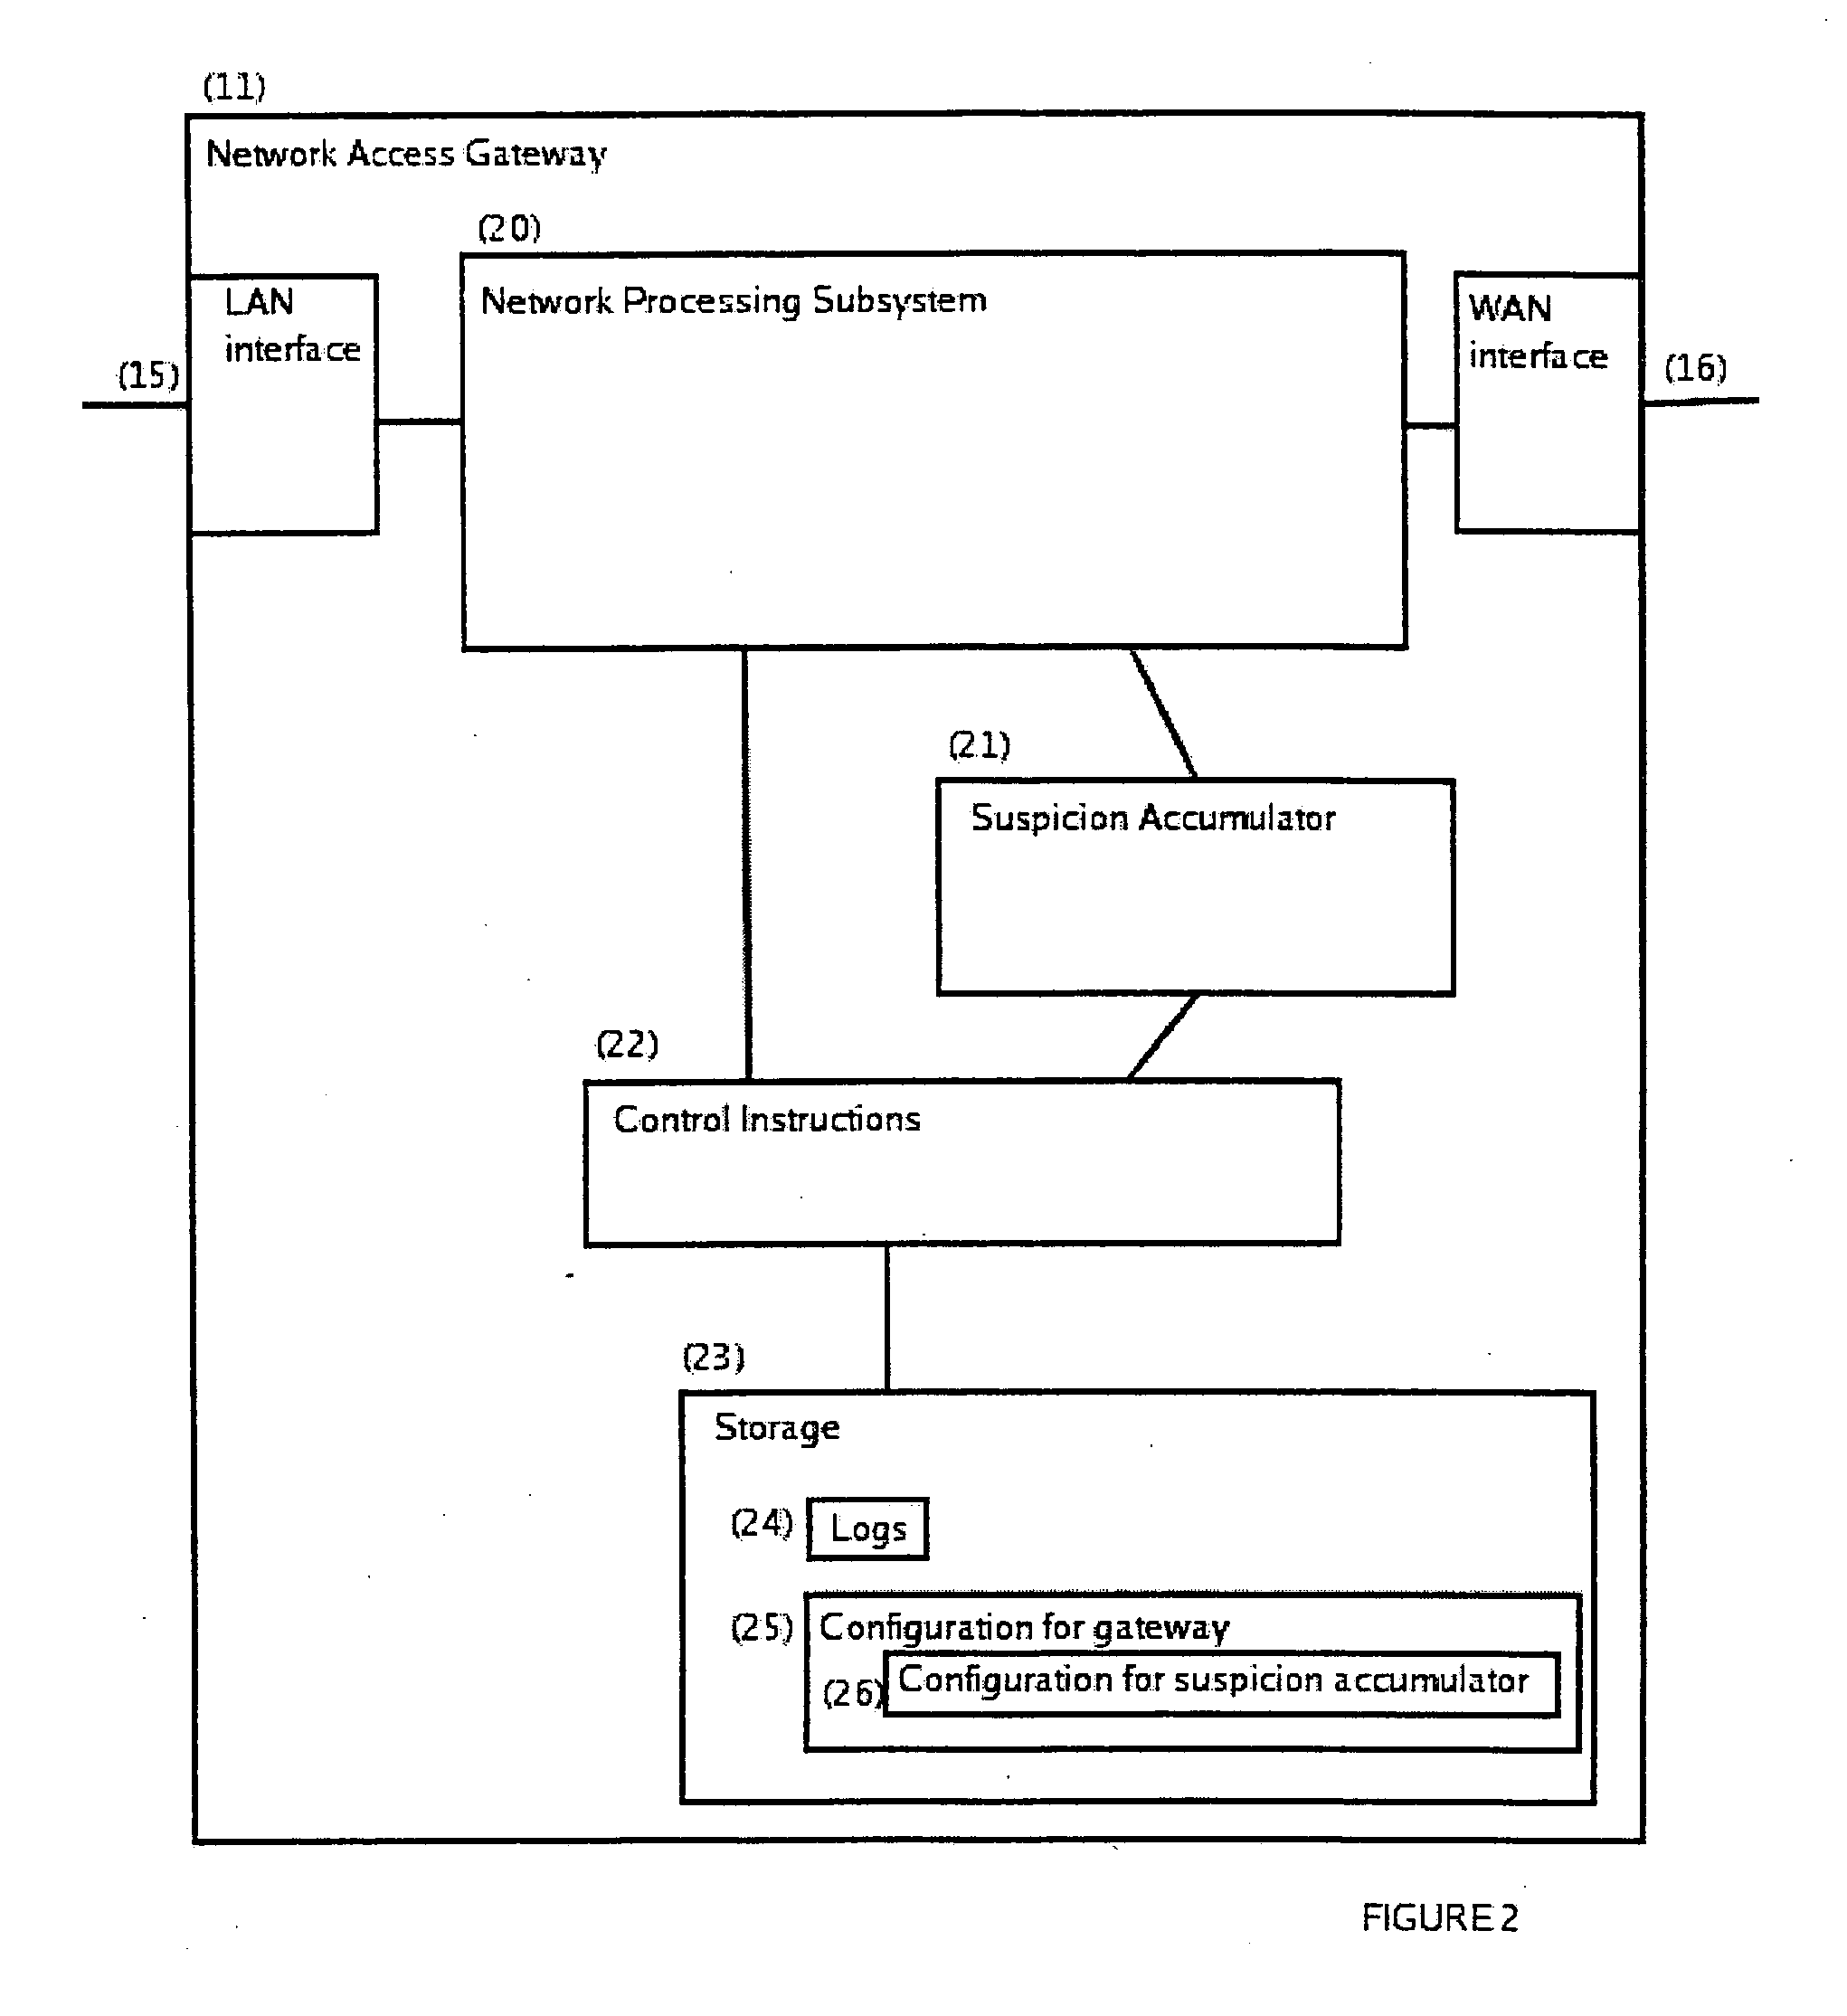 System and method for detection of aberrant network behavior by clients of a network access gateway